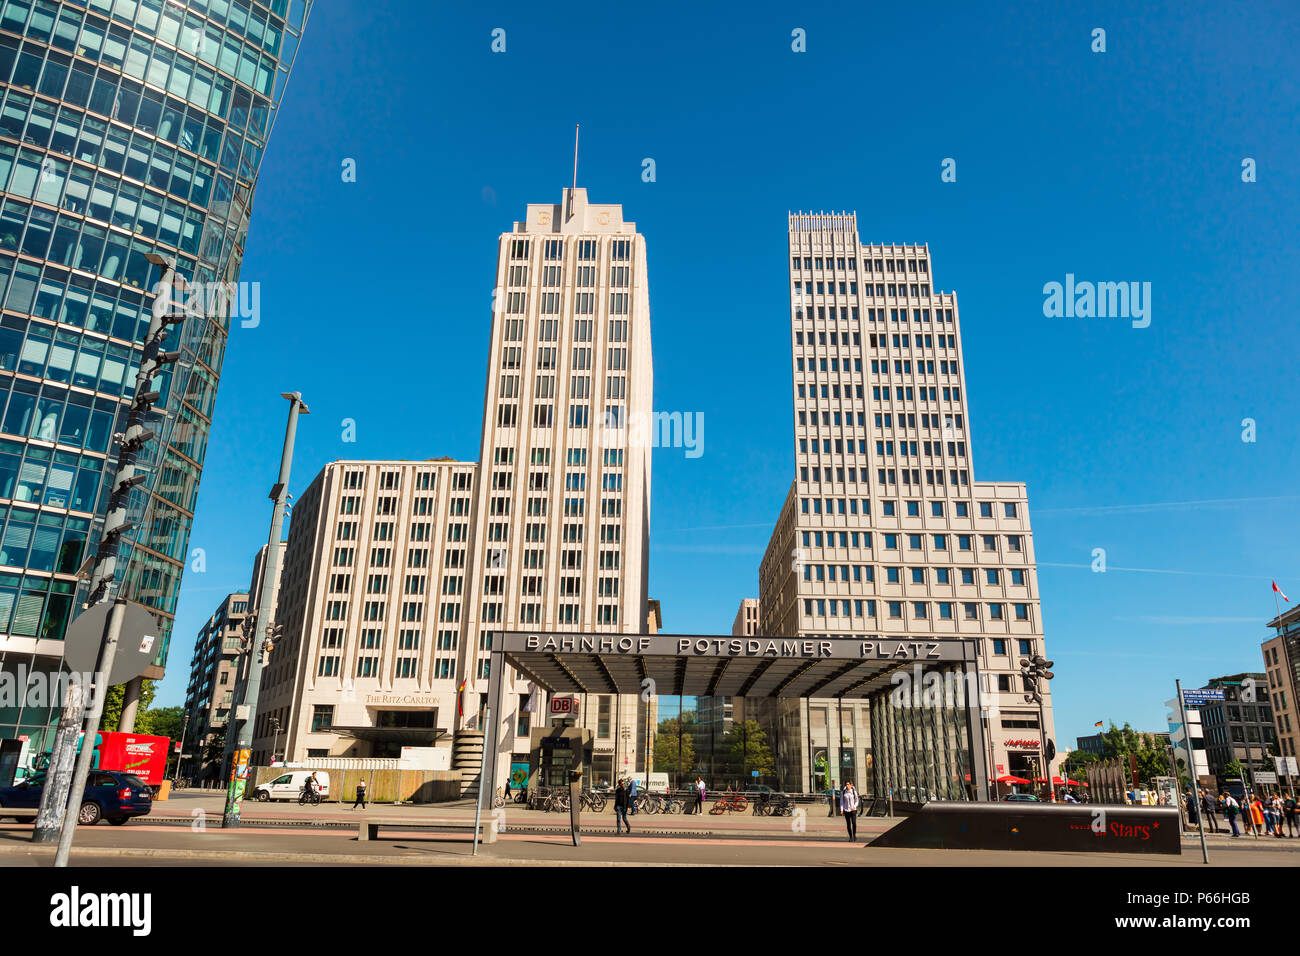 Potsdamer Platz (Potsdam Square) is a unique urban space central to Berlin and its history. Stock Photo